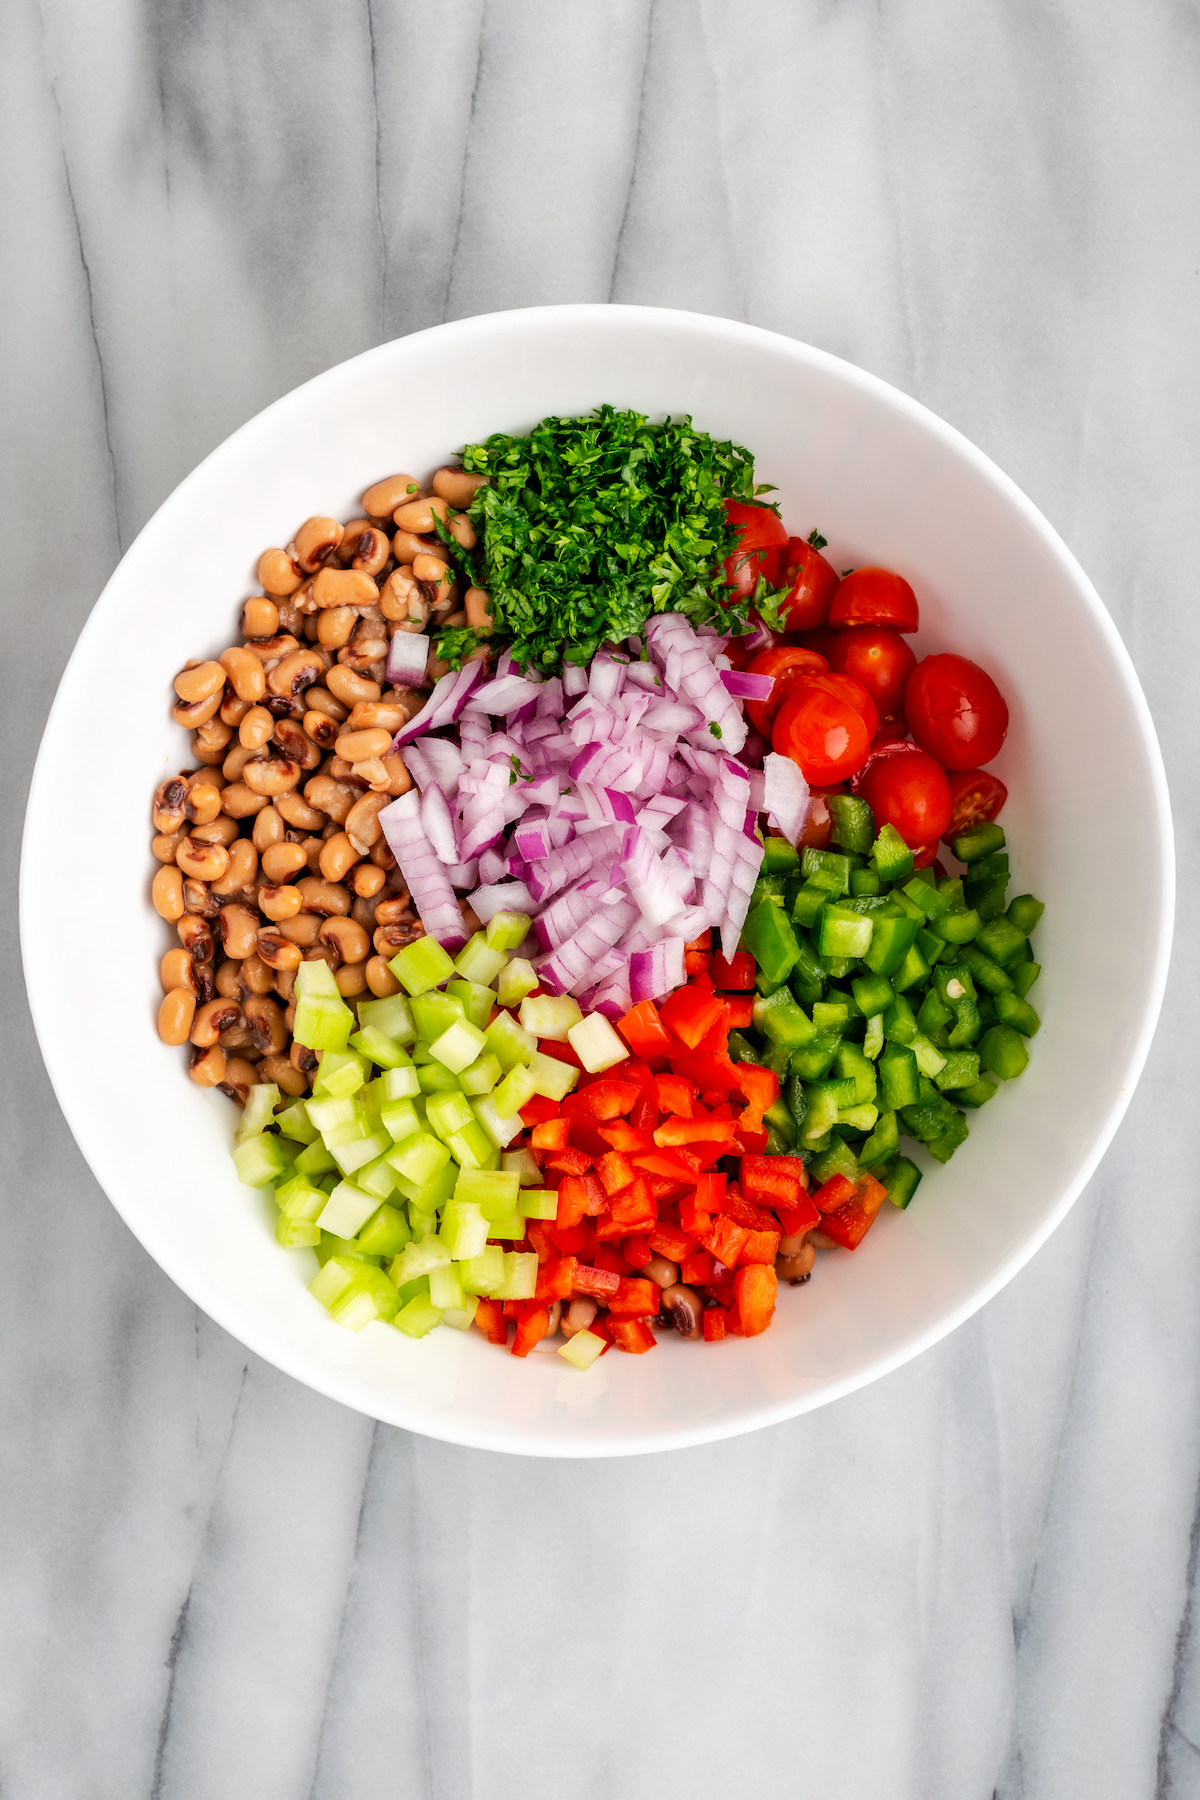 Overhead view of salad ingredients in large white mixing bowl